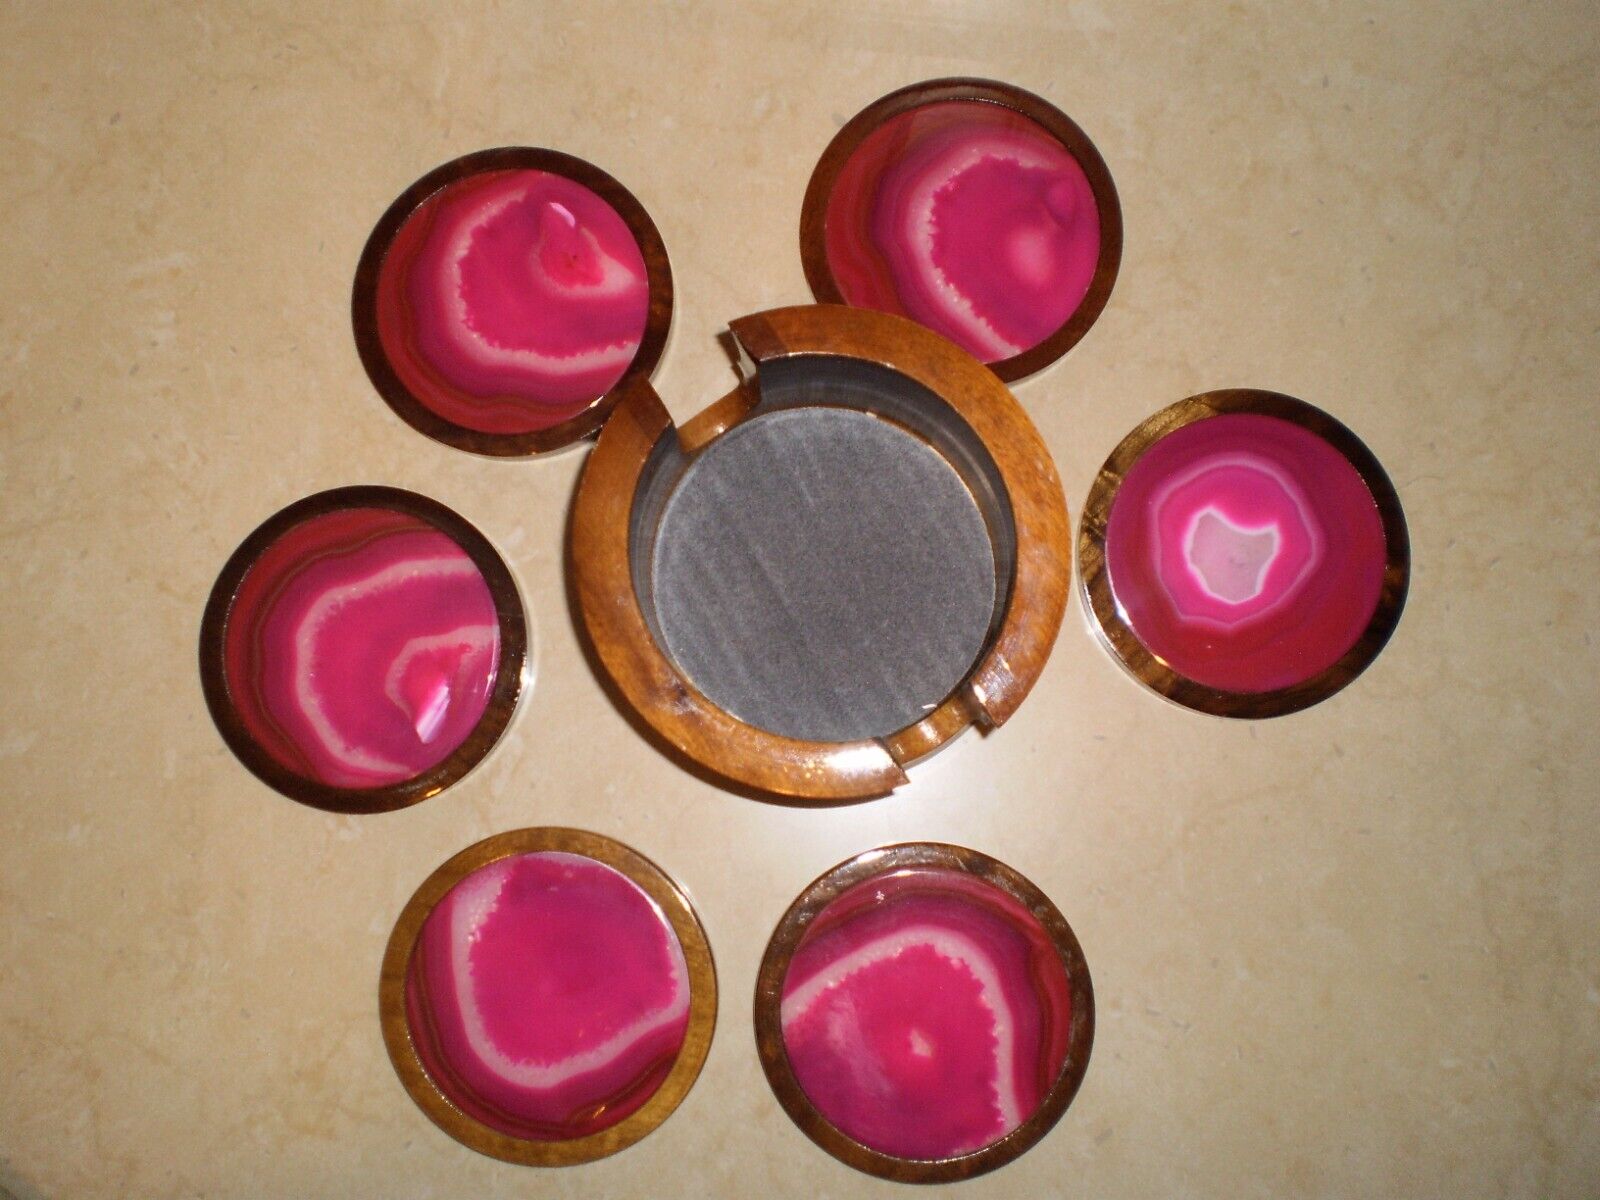 Vintage Agate Geode Crystal Stone Set Of 6 Coasters With Holder BEAUTIFUL COLOR